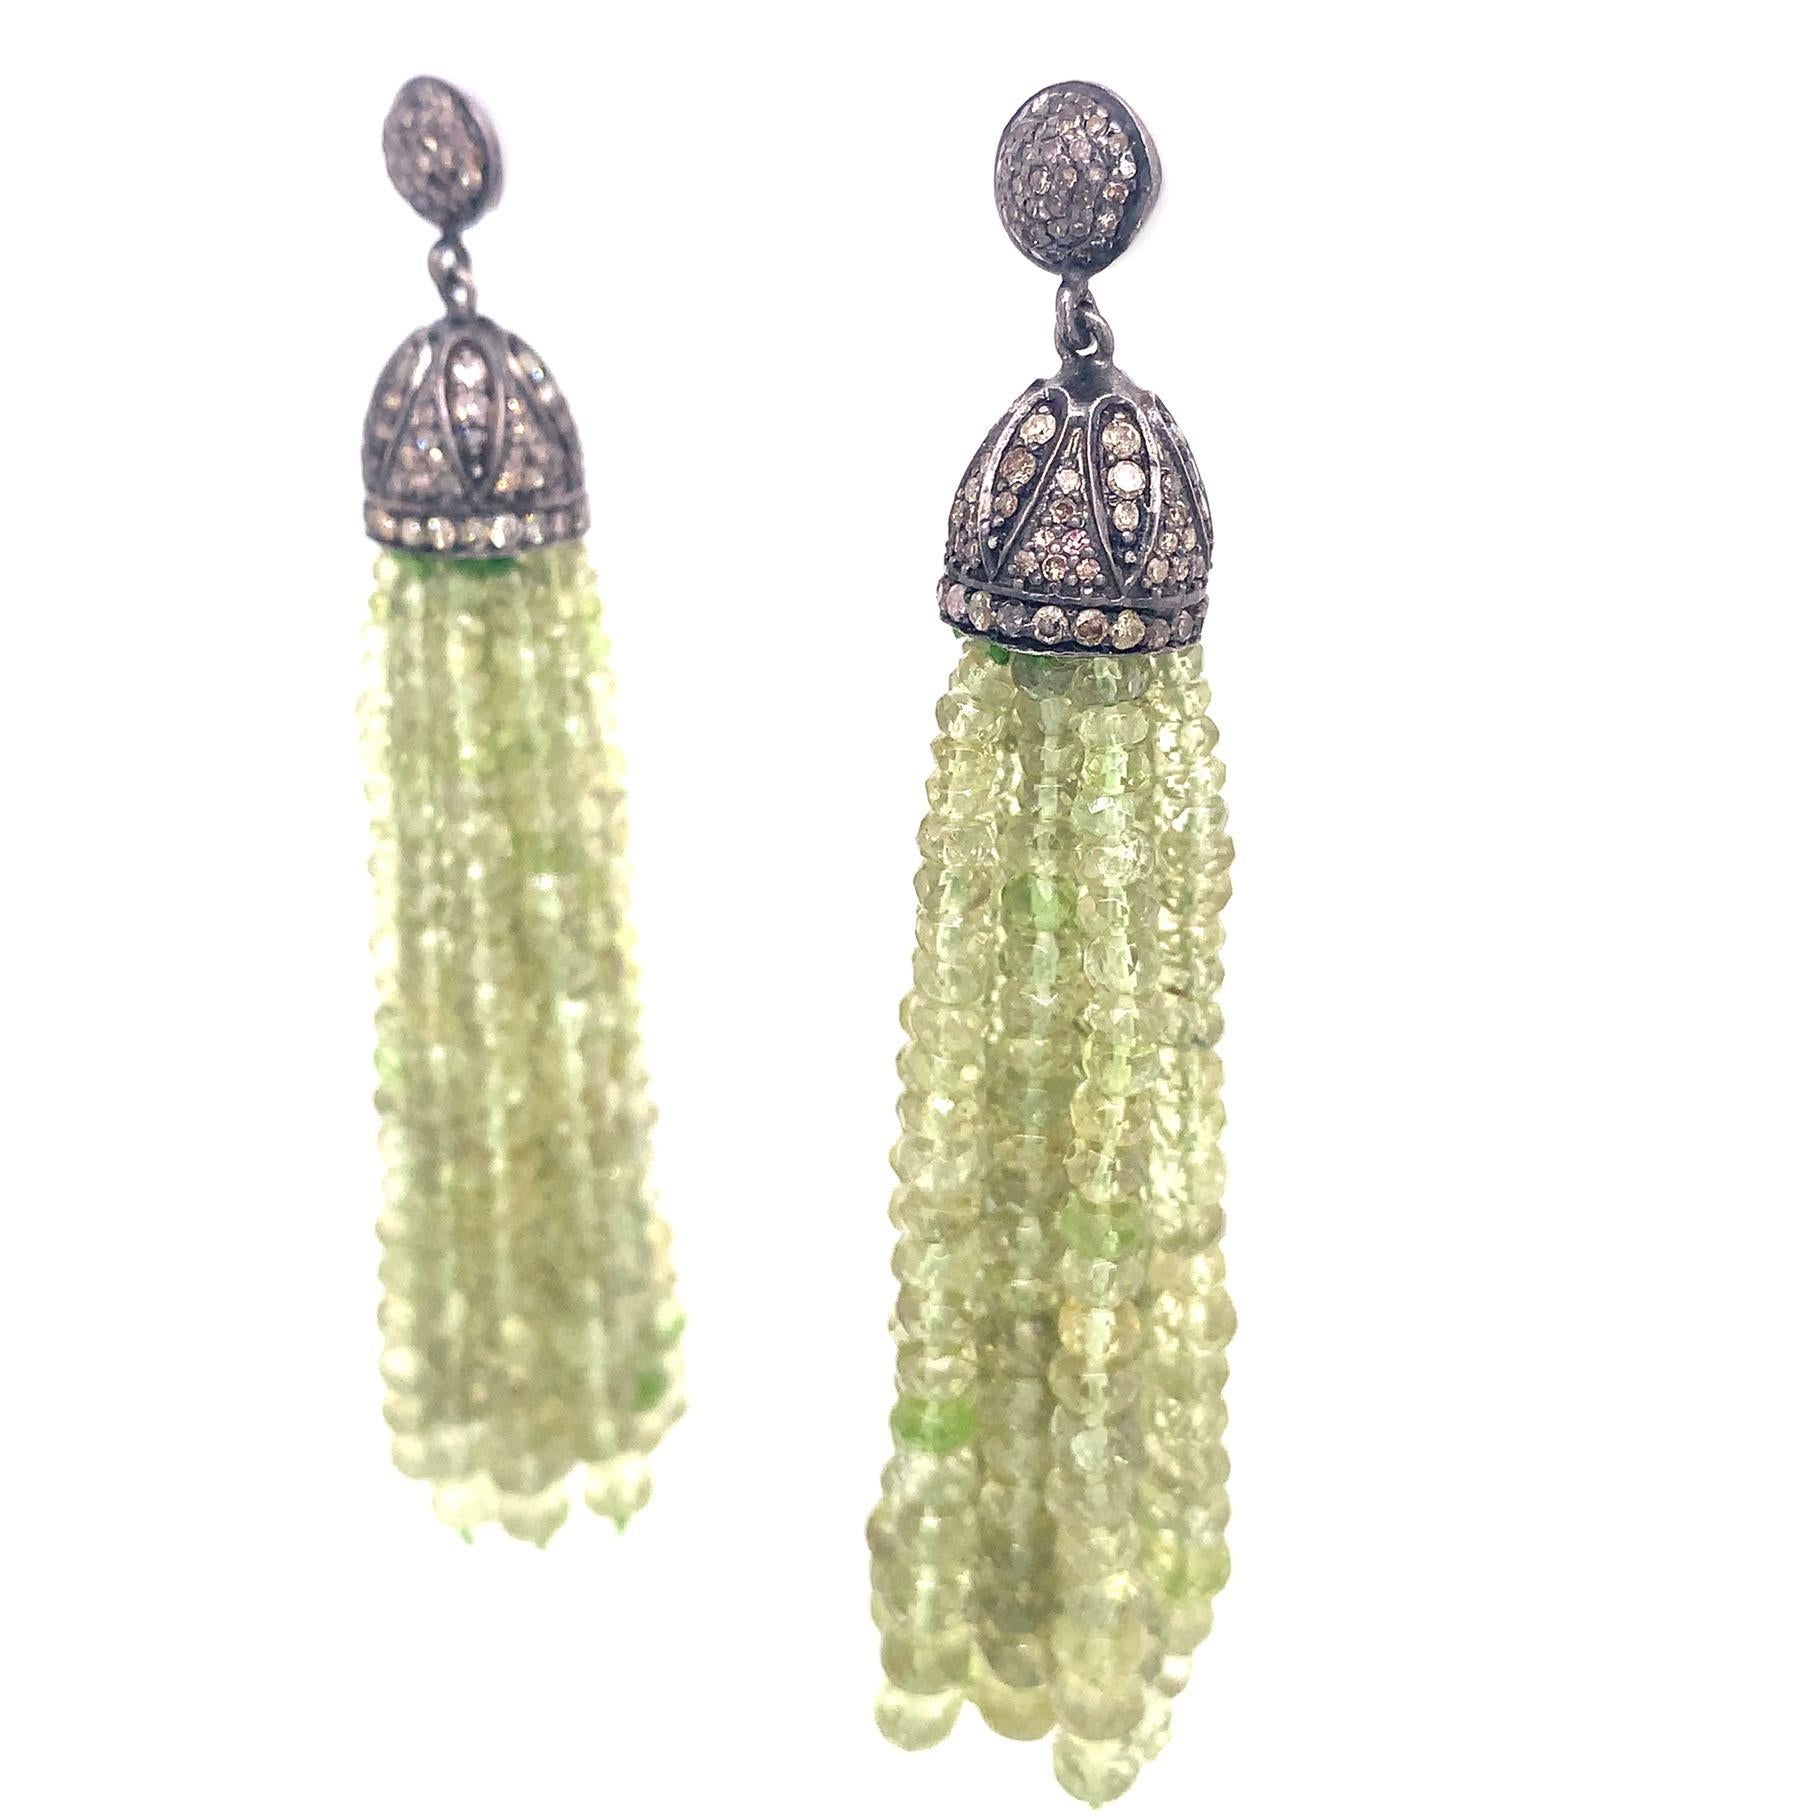 Life in Color Collection

Peridot beads featured tassel dangling from a bead cup set with Rustic Diamonds in Sterling Silver.

Peridot: 198.01ct total weight.
Diamond: 1.98ct total weight.